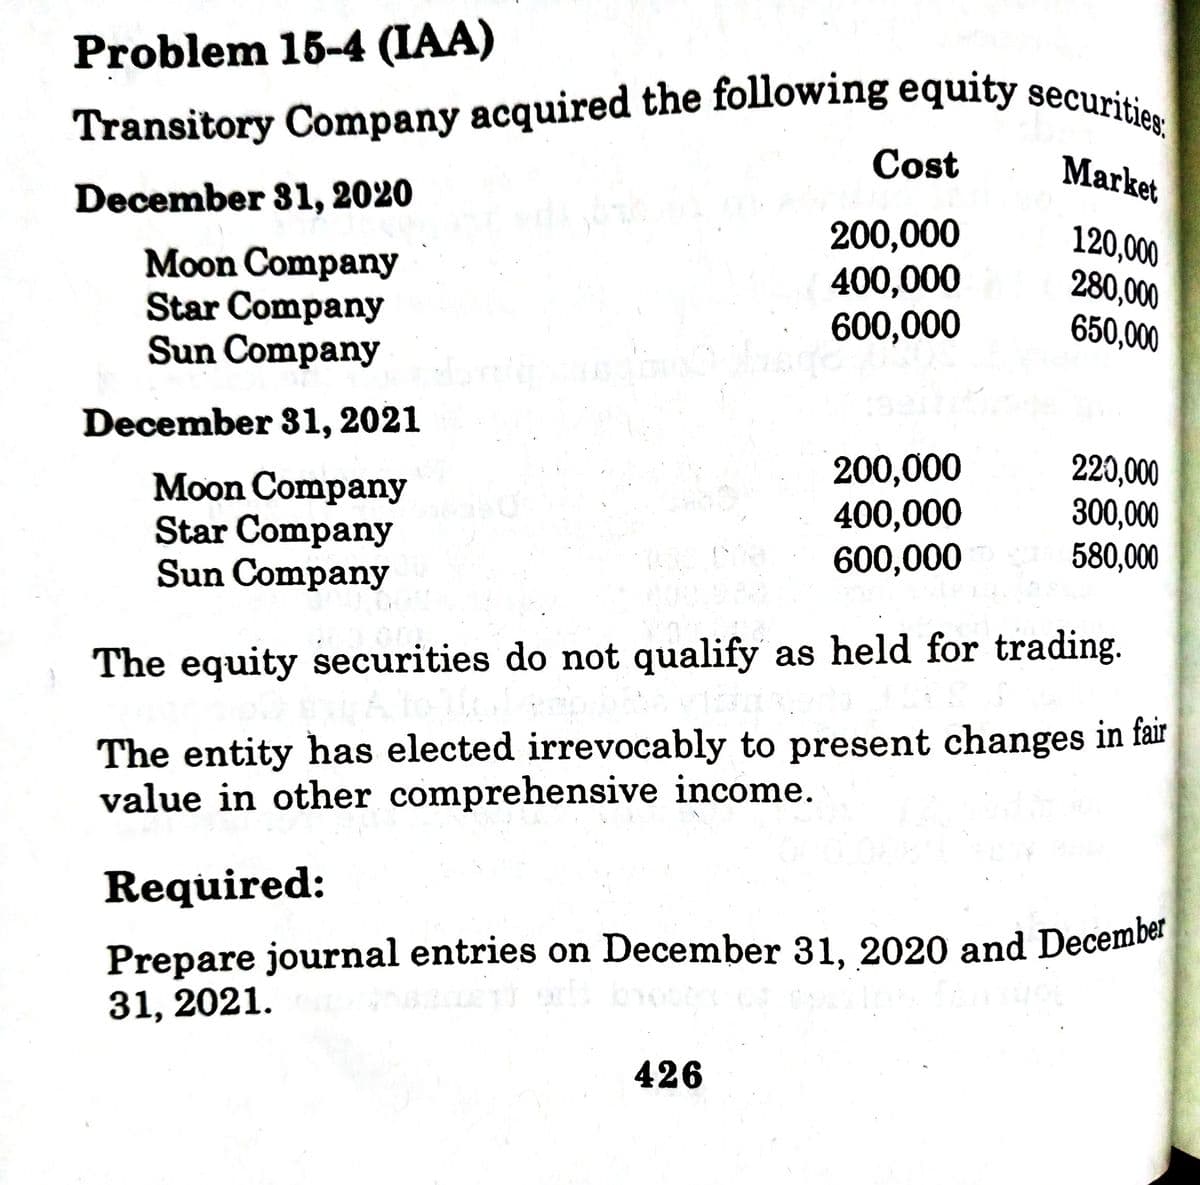 Prepare journal entries on December 31, 2020 and December
Problem 15-4 (IAA)
Transitory Company acquired the following equity securities
Cost
Market
December 31, 2020
Moon Company
Star Company
Sun Company
200,000
400,000
600,000
120,000
280,000
650,000
December 31, 2021
Moon Company
Star Company
Sun Company
200,000
400,000
600,000
220,000
300,000
580,000
The equity securities do not qualify as held for trading.
The entity has elected irrevocably to present changes in fair
value in other comprehensive income.
Required:
31, 2021.
426
